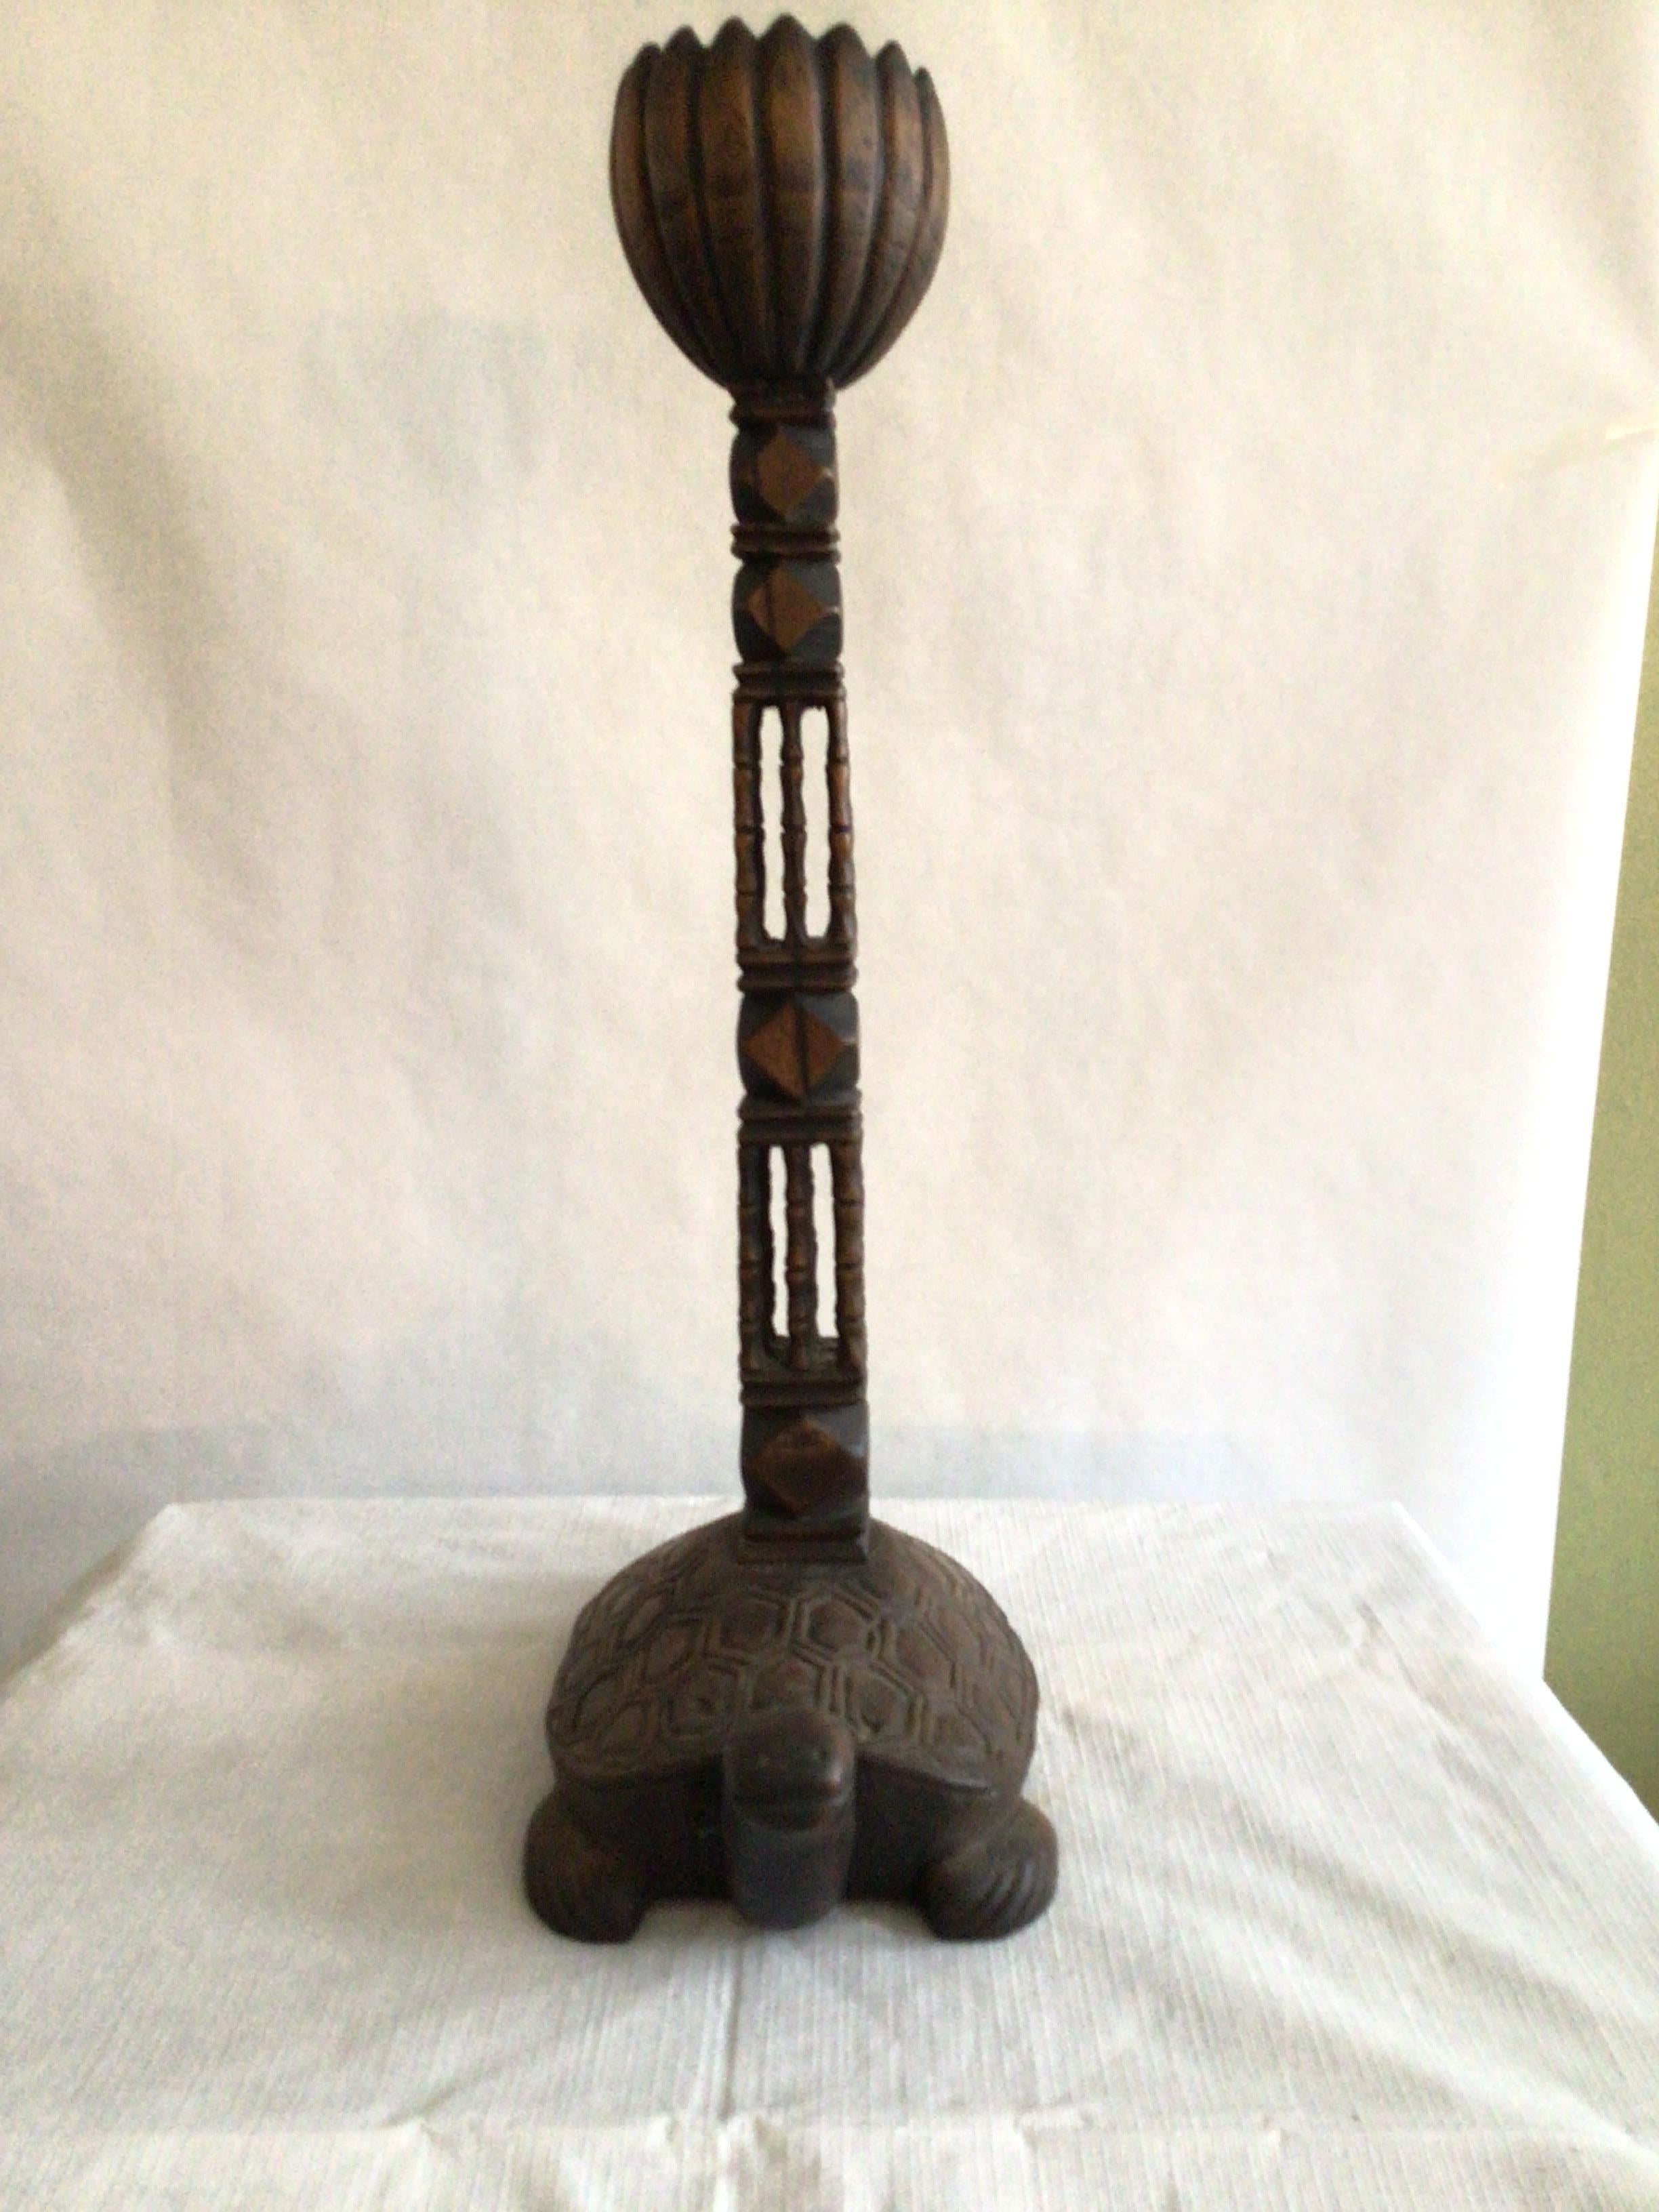 1960s hand-carved wood Turtle candlestick.